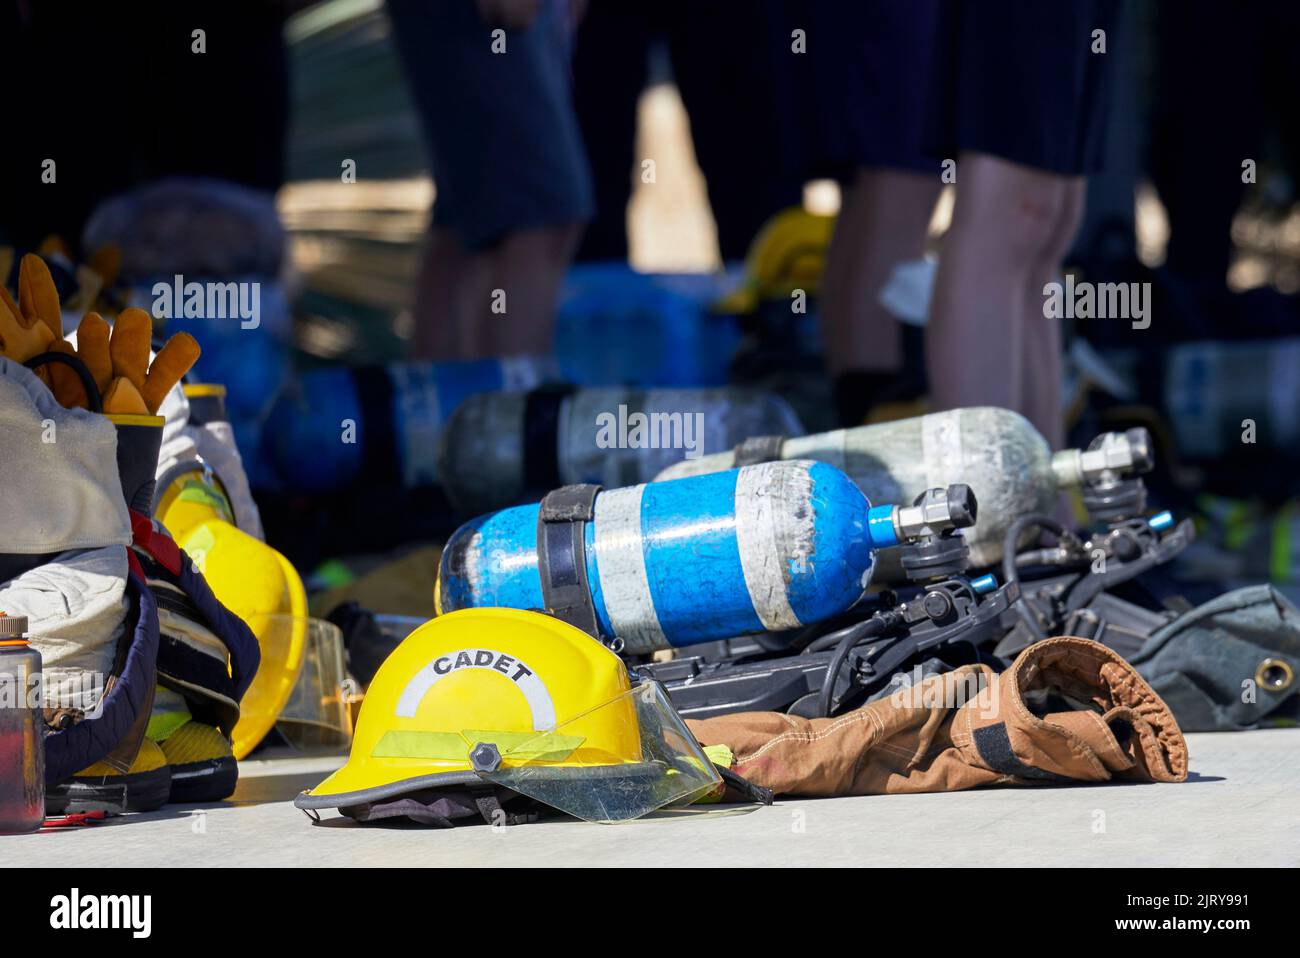 Newly recruited cadet fire firefighters in training with equipment Stock Photo